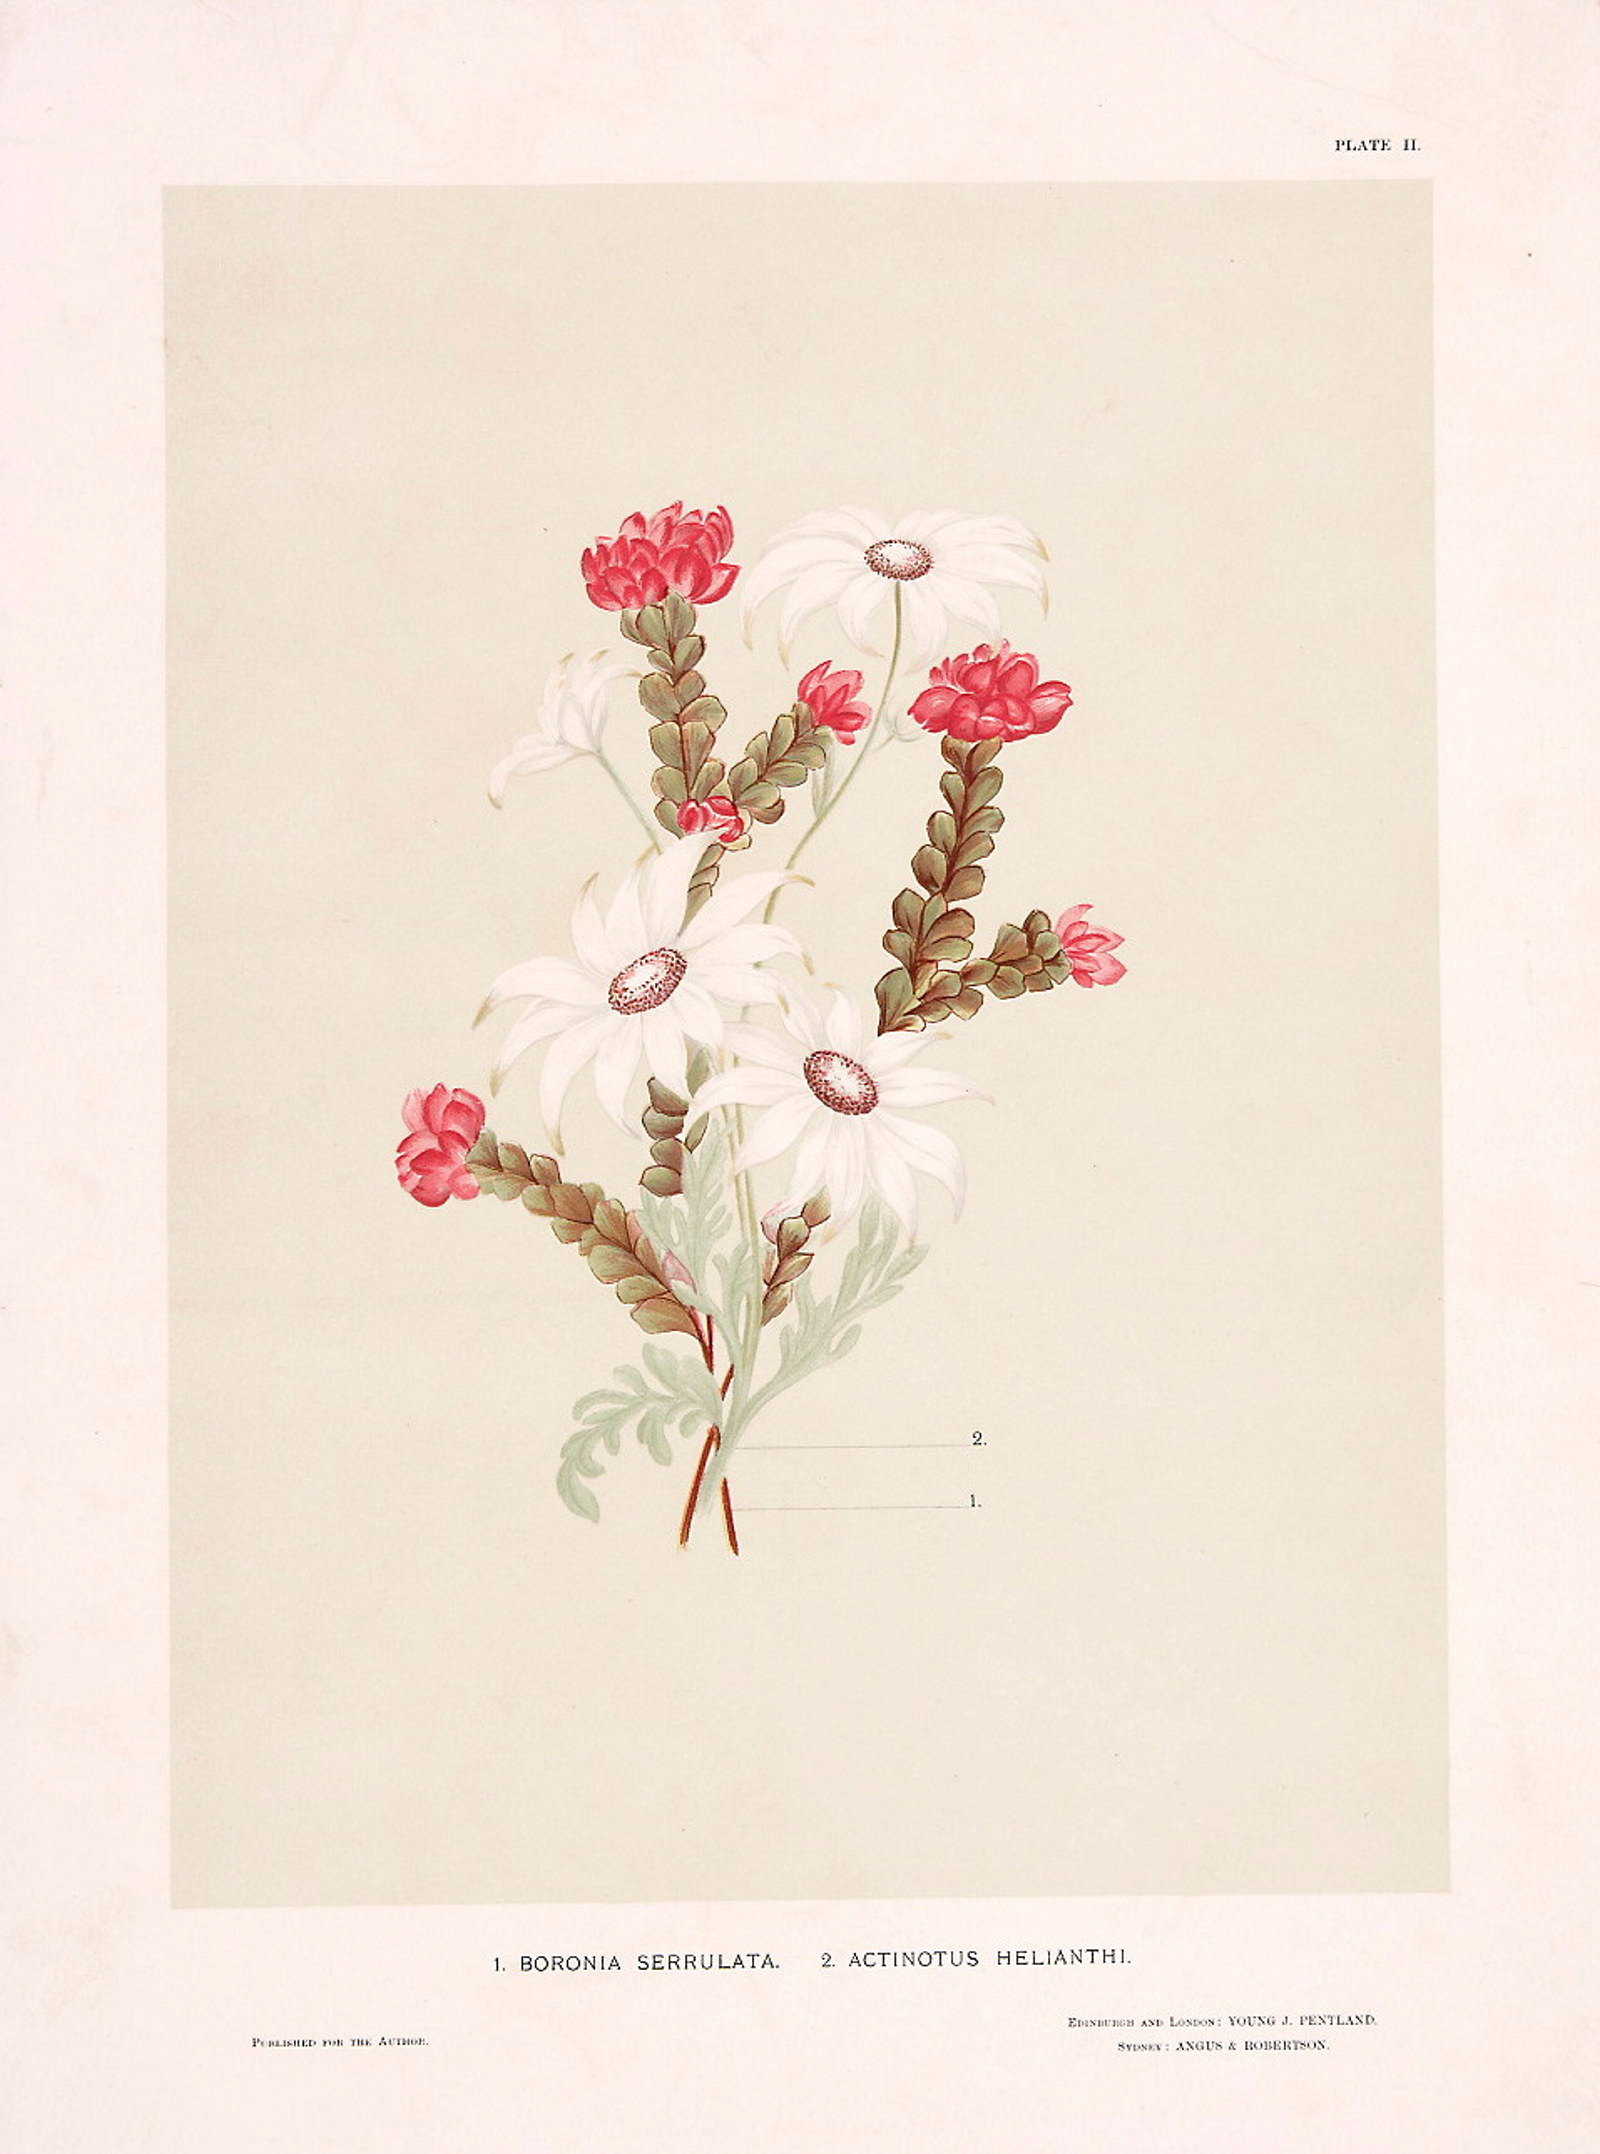 Print from book of white and pink wildflowers.